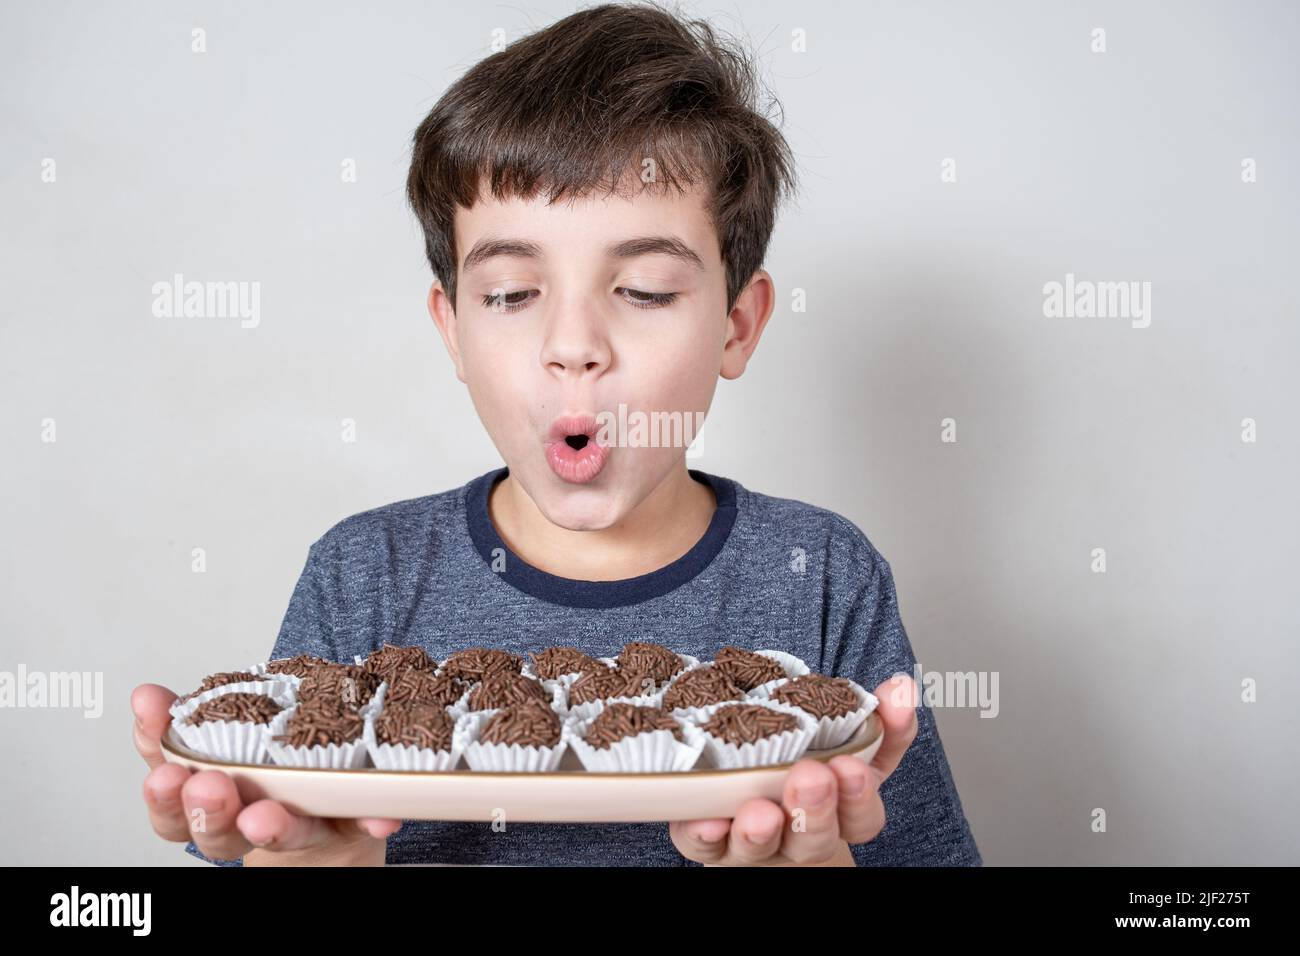 9 Year Old Brazilian Looking At A Tray With Several Brazilian Fudge Balls And Looking Surprised